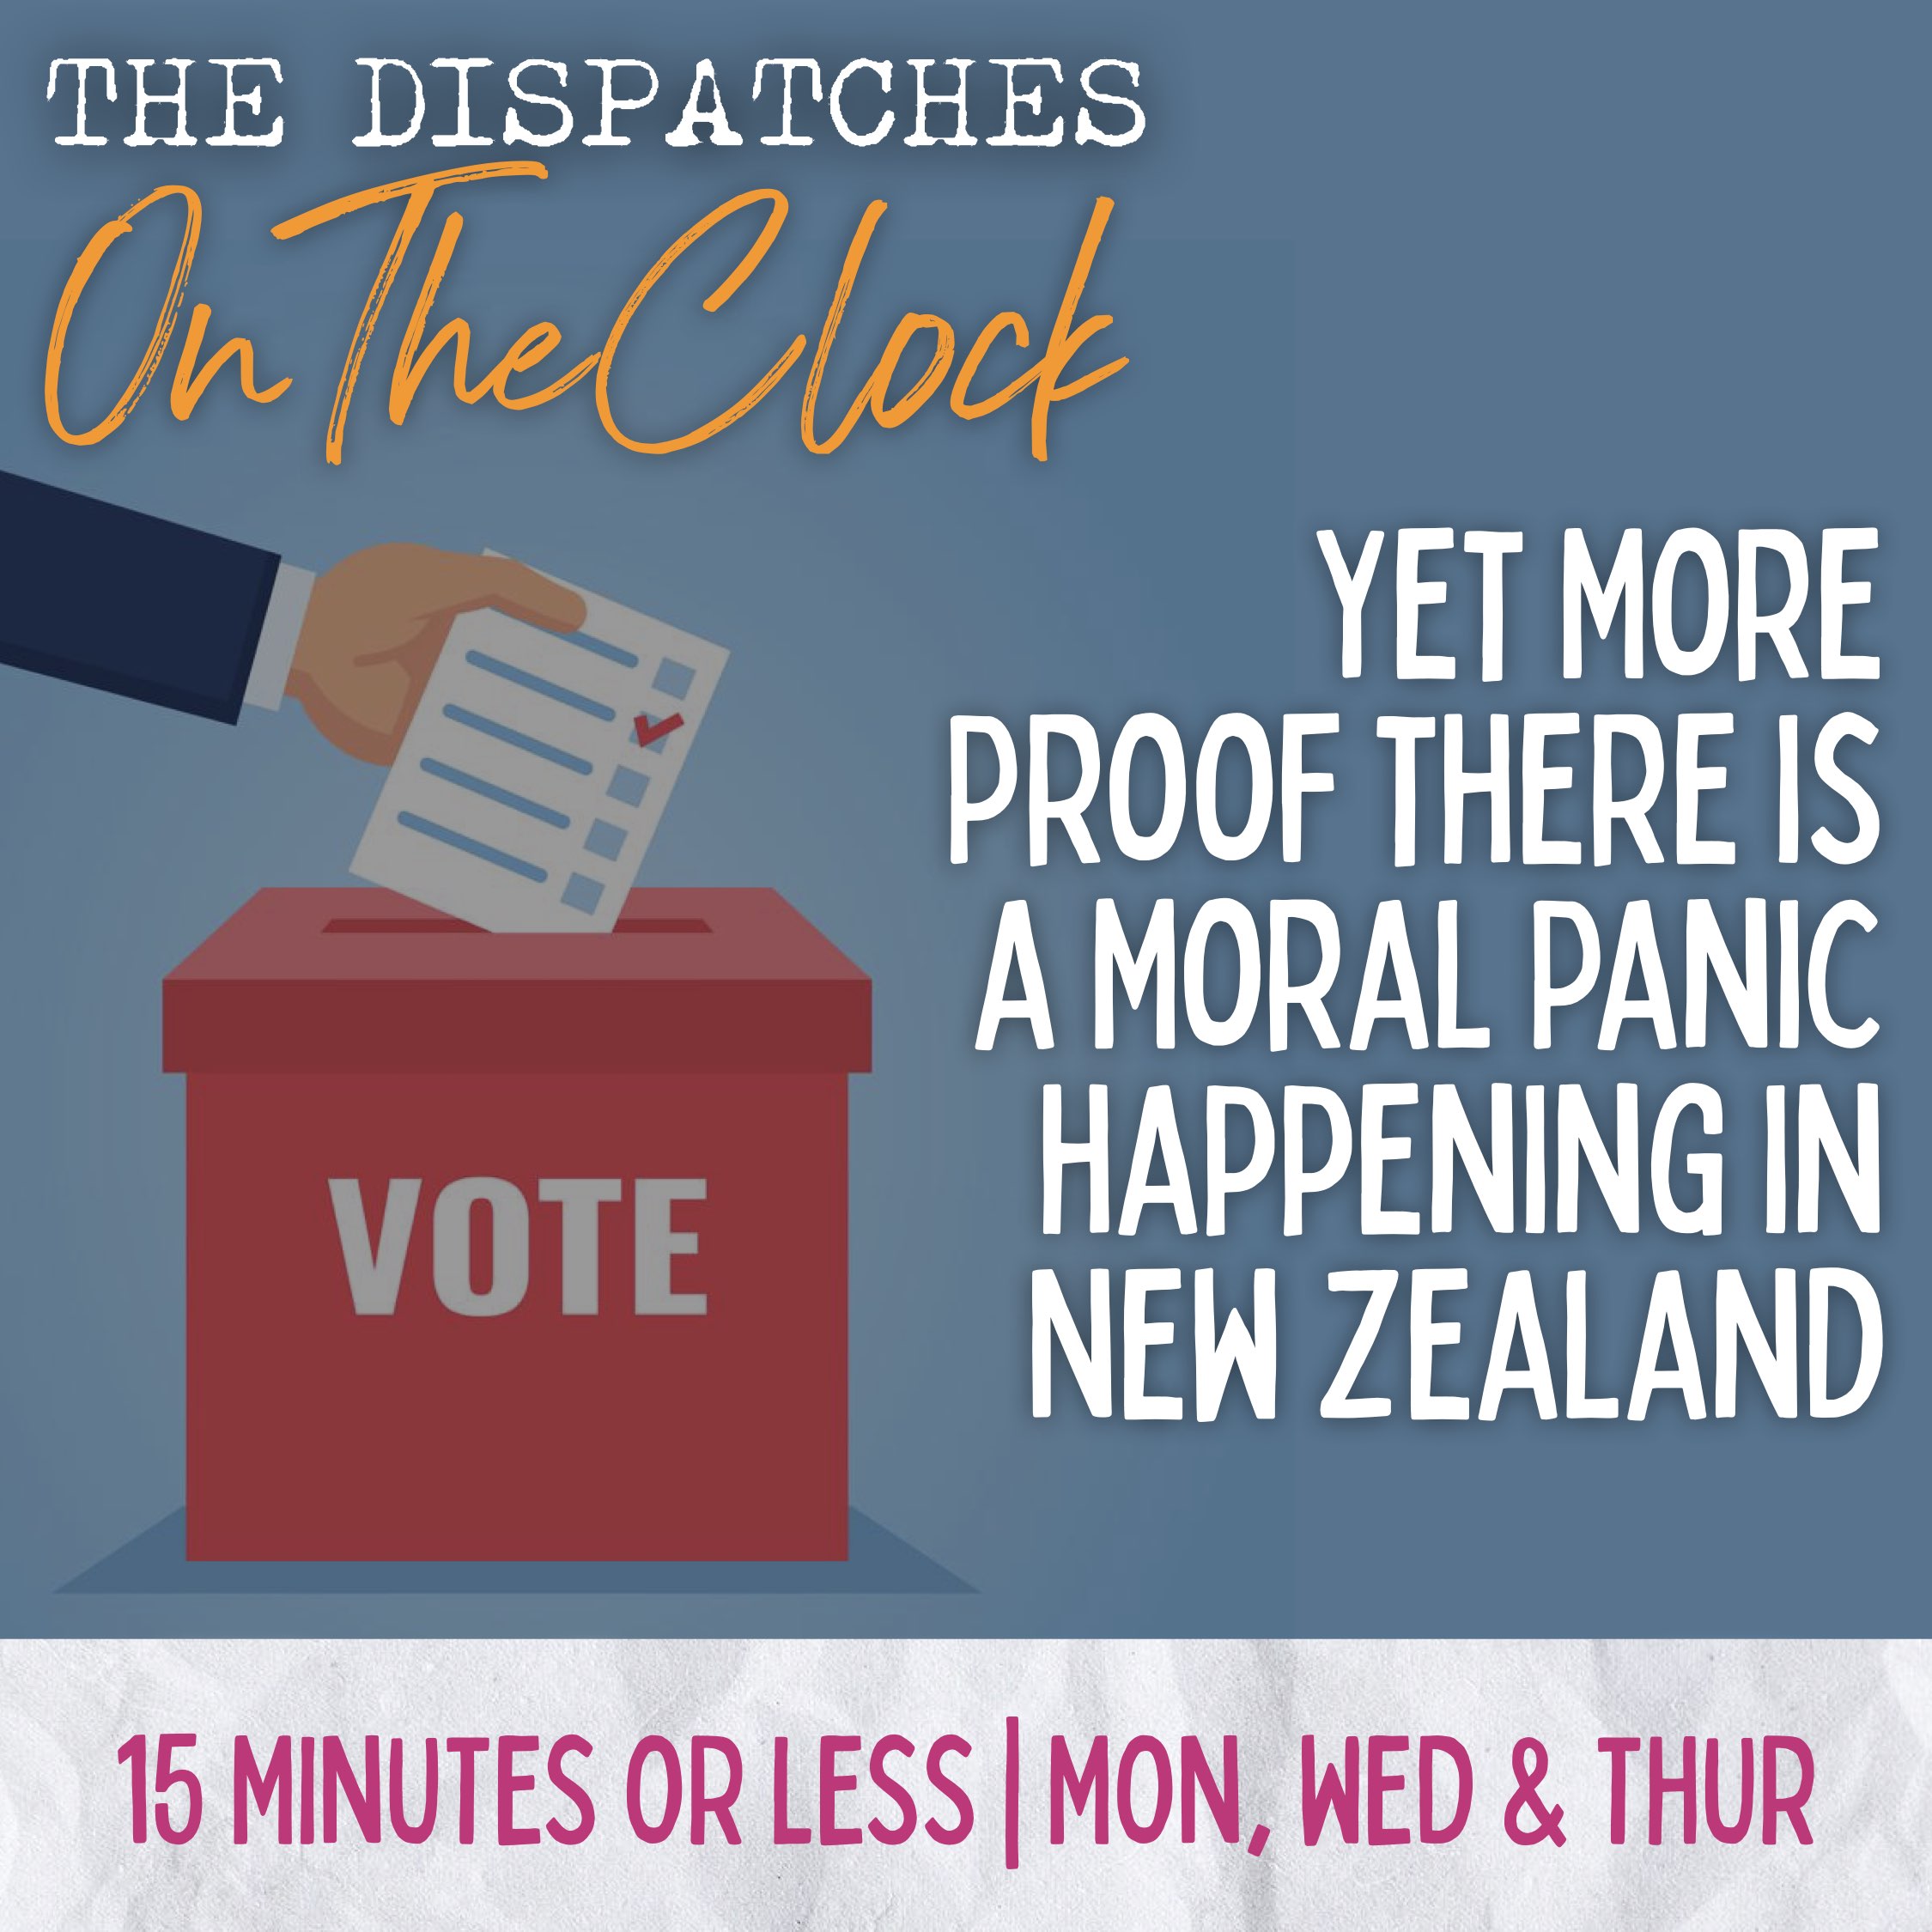 ON THE CLOCK | Yet More Proof There is a Moral Panic Happening in NZ